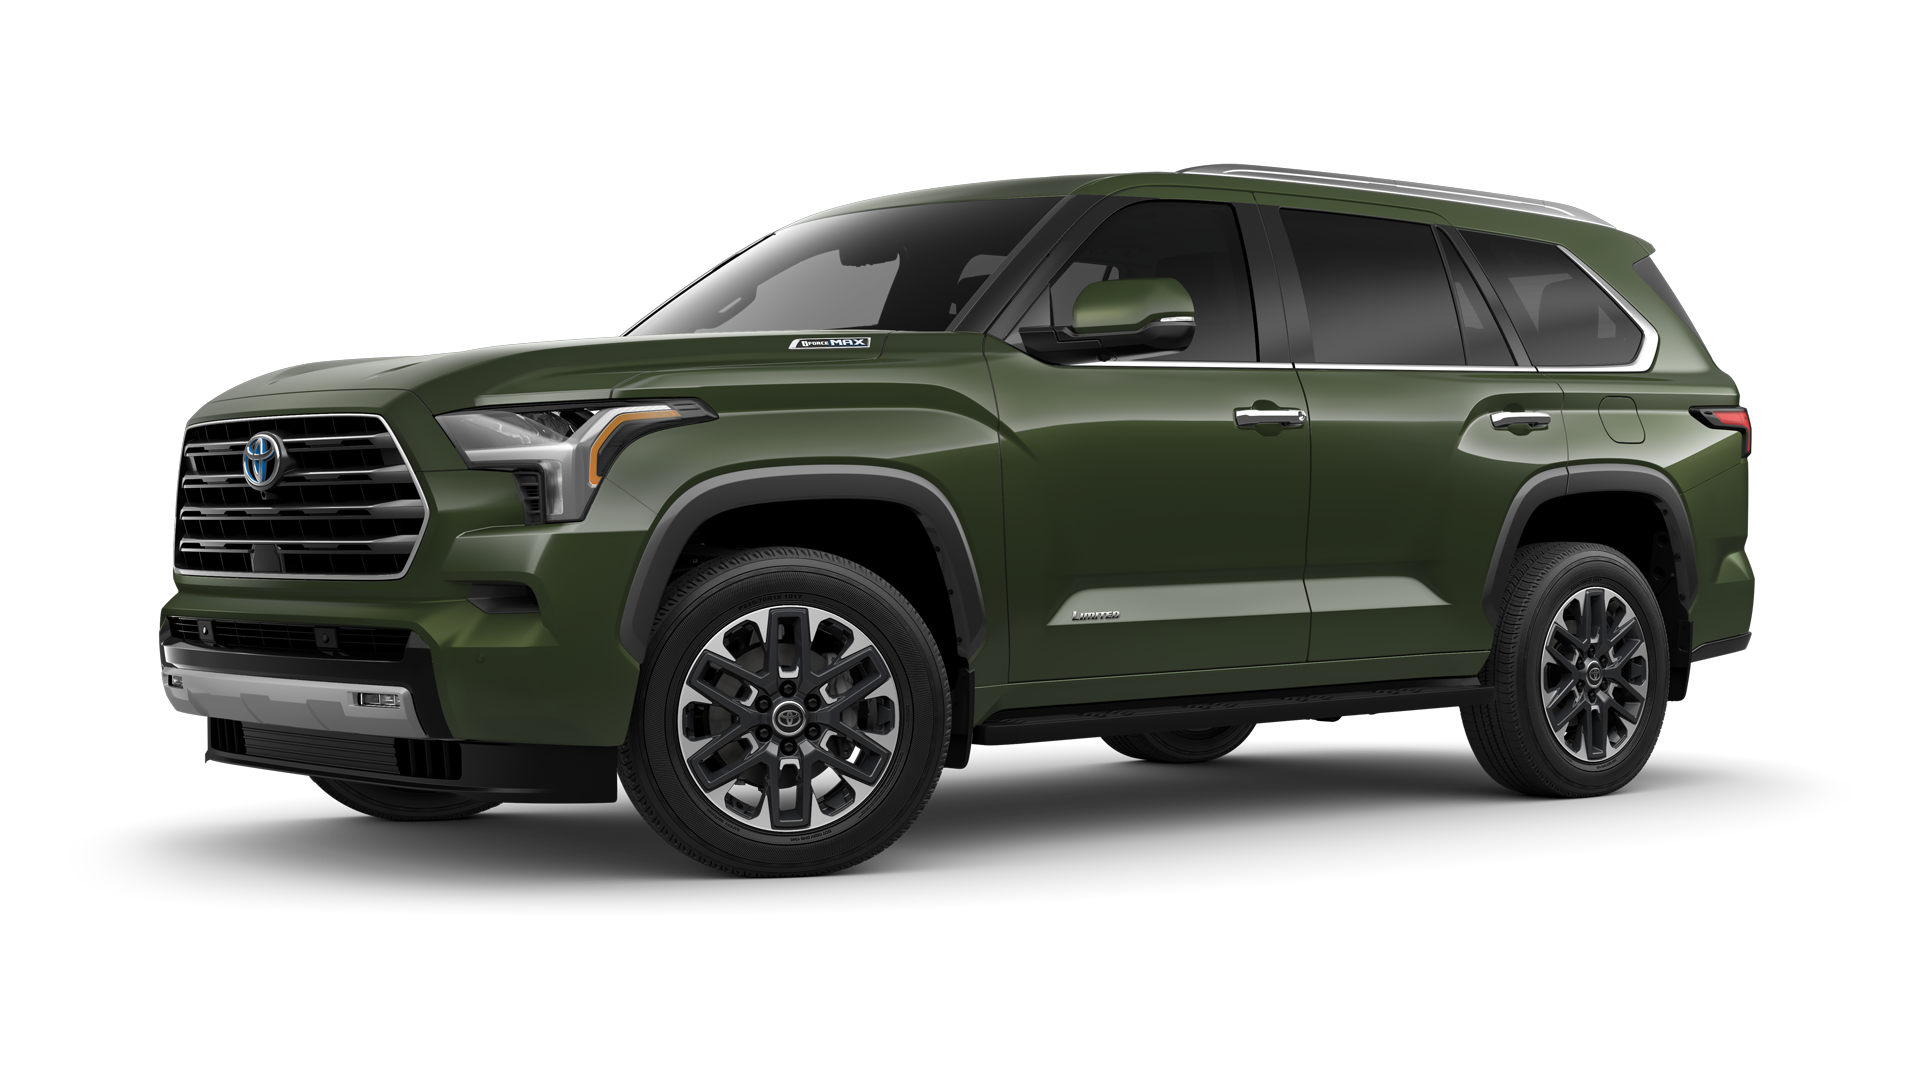 2023 Toyota Sequoia in Army Green.